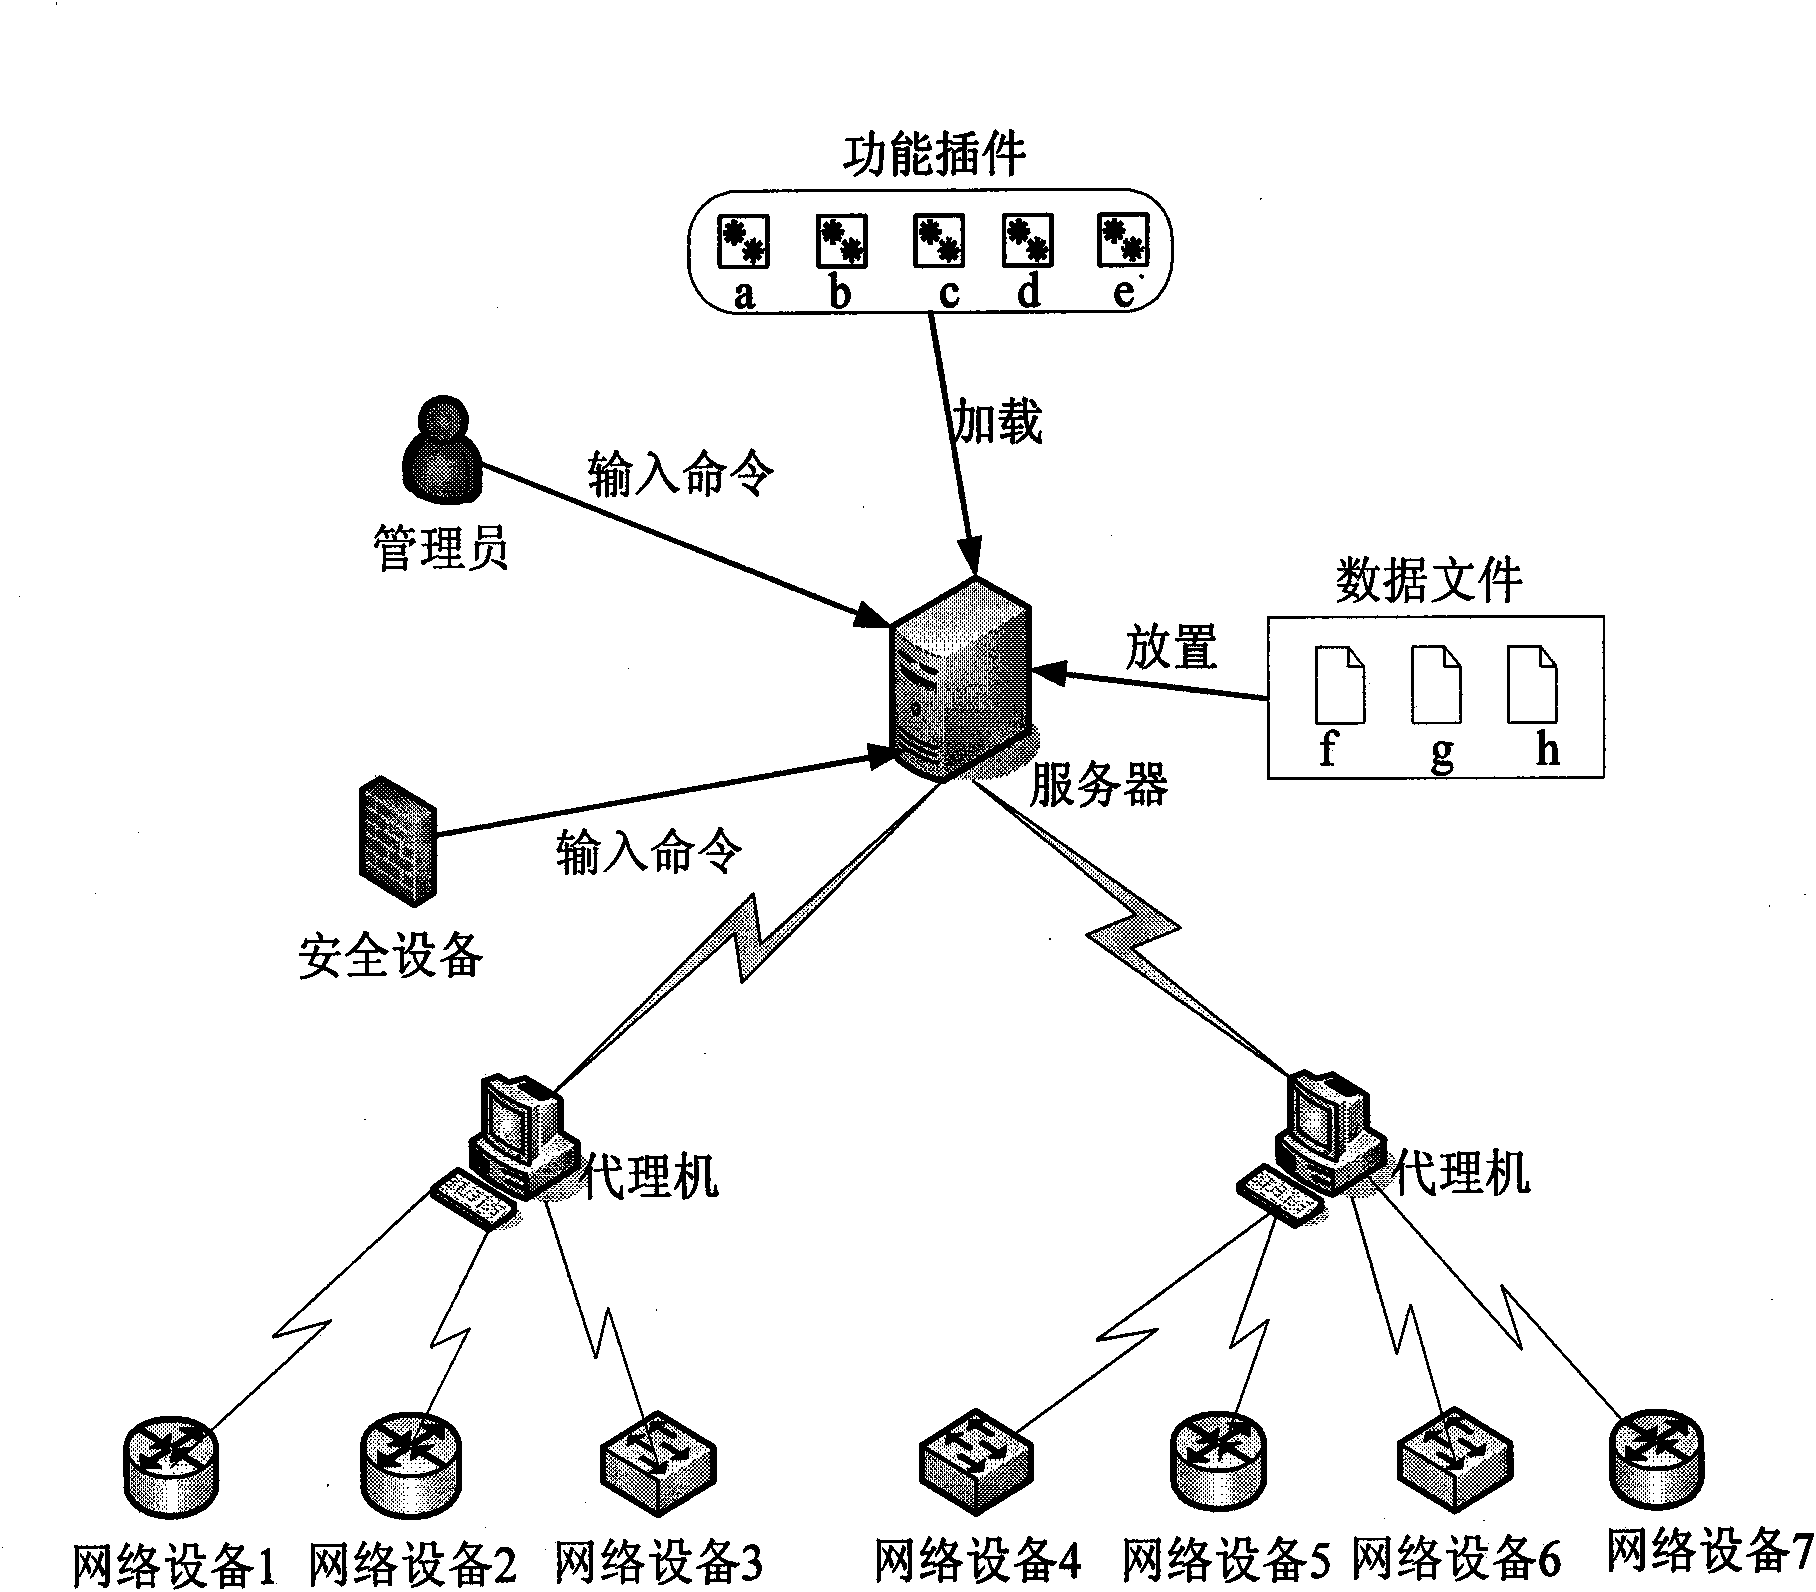 System and method for unified configuration of network equipment